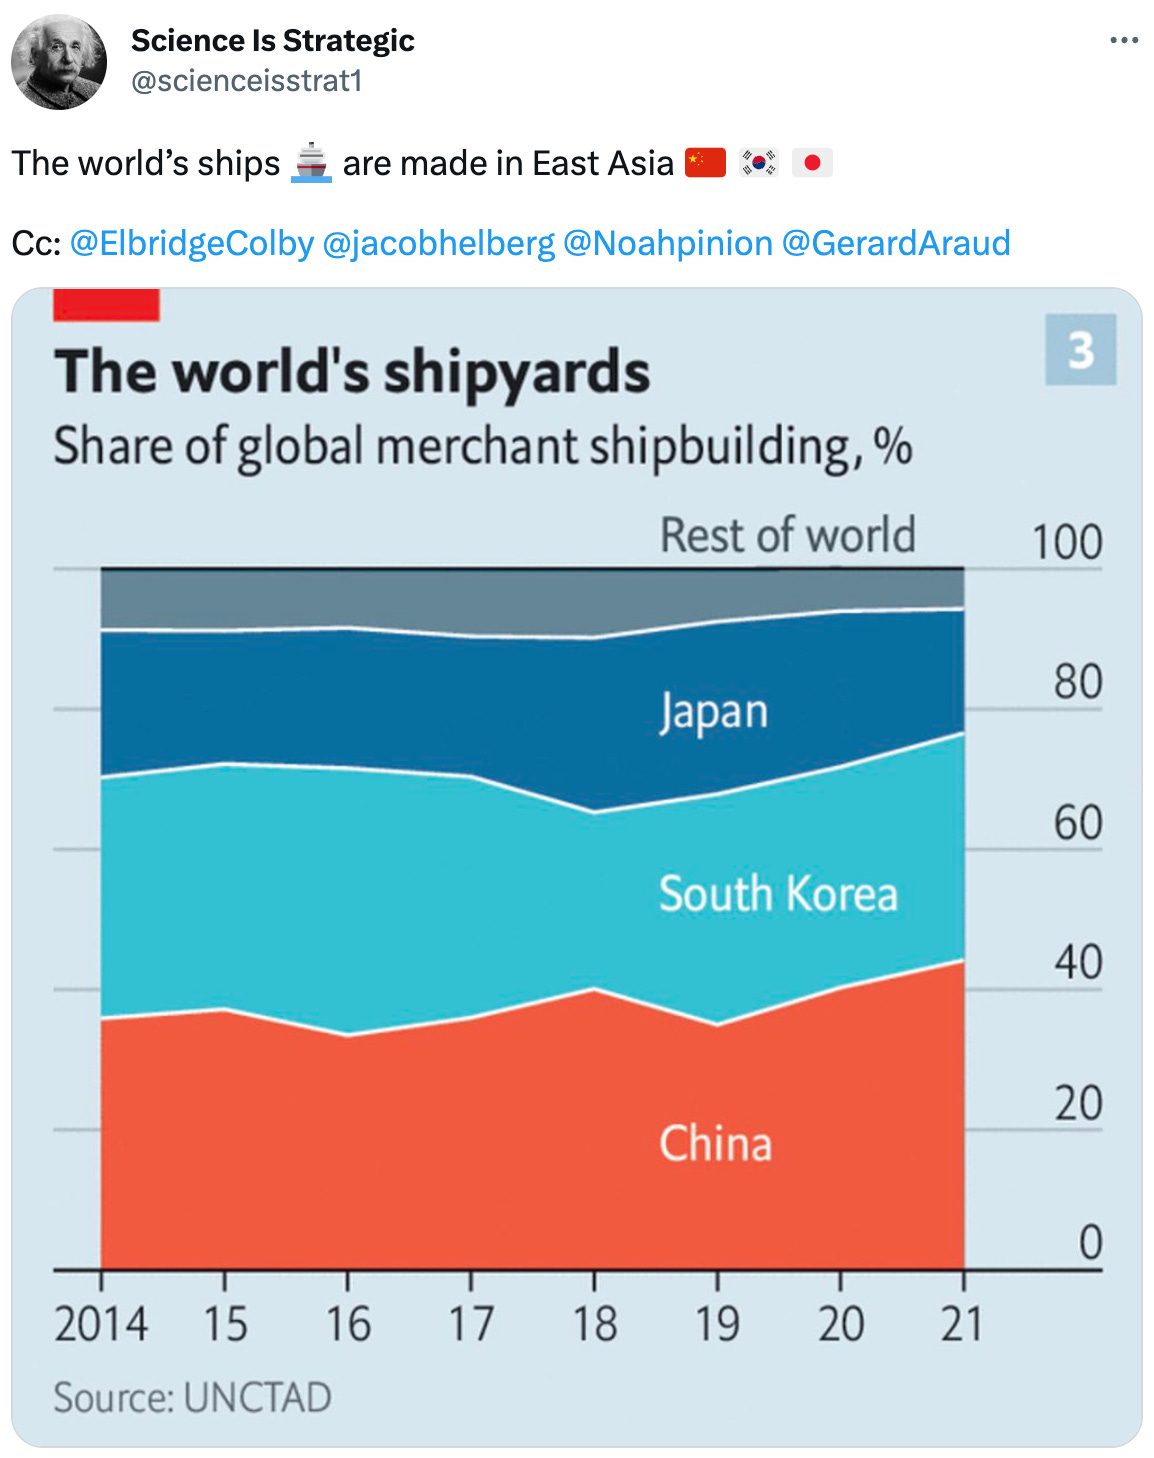  Science Is Strategic @scienceisstrat1 The world’s ships 🚢 are made in East Asia 🇨🇳 🇰🇷 🇯🇵  Cc:  @ElbridgeColby   @jacobhelberg   @Noahpinion   @GerardAraud